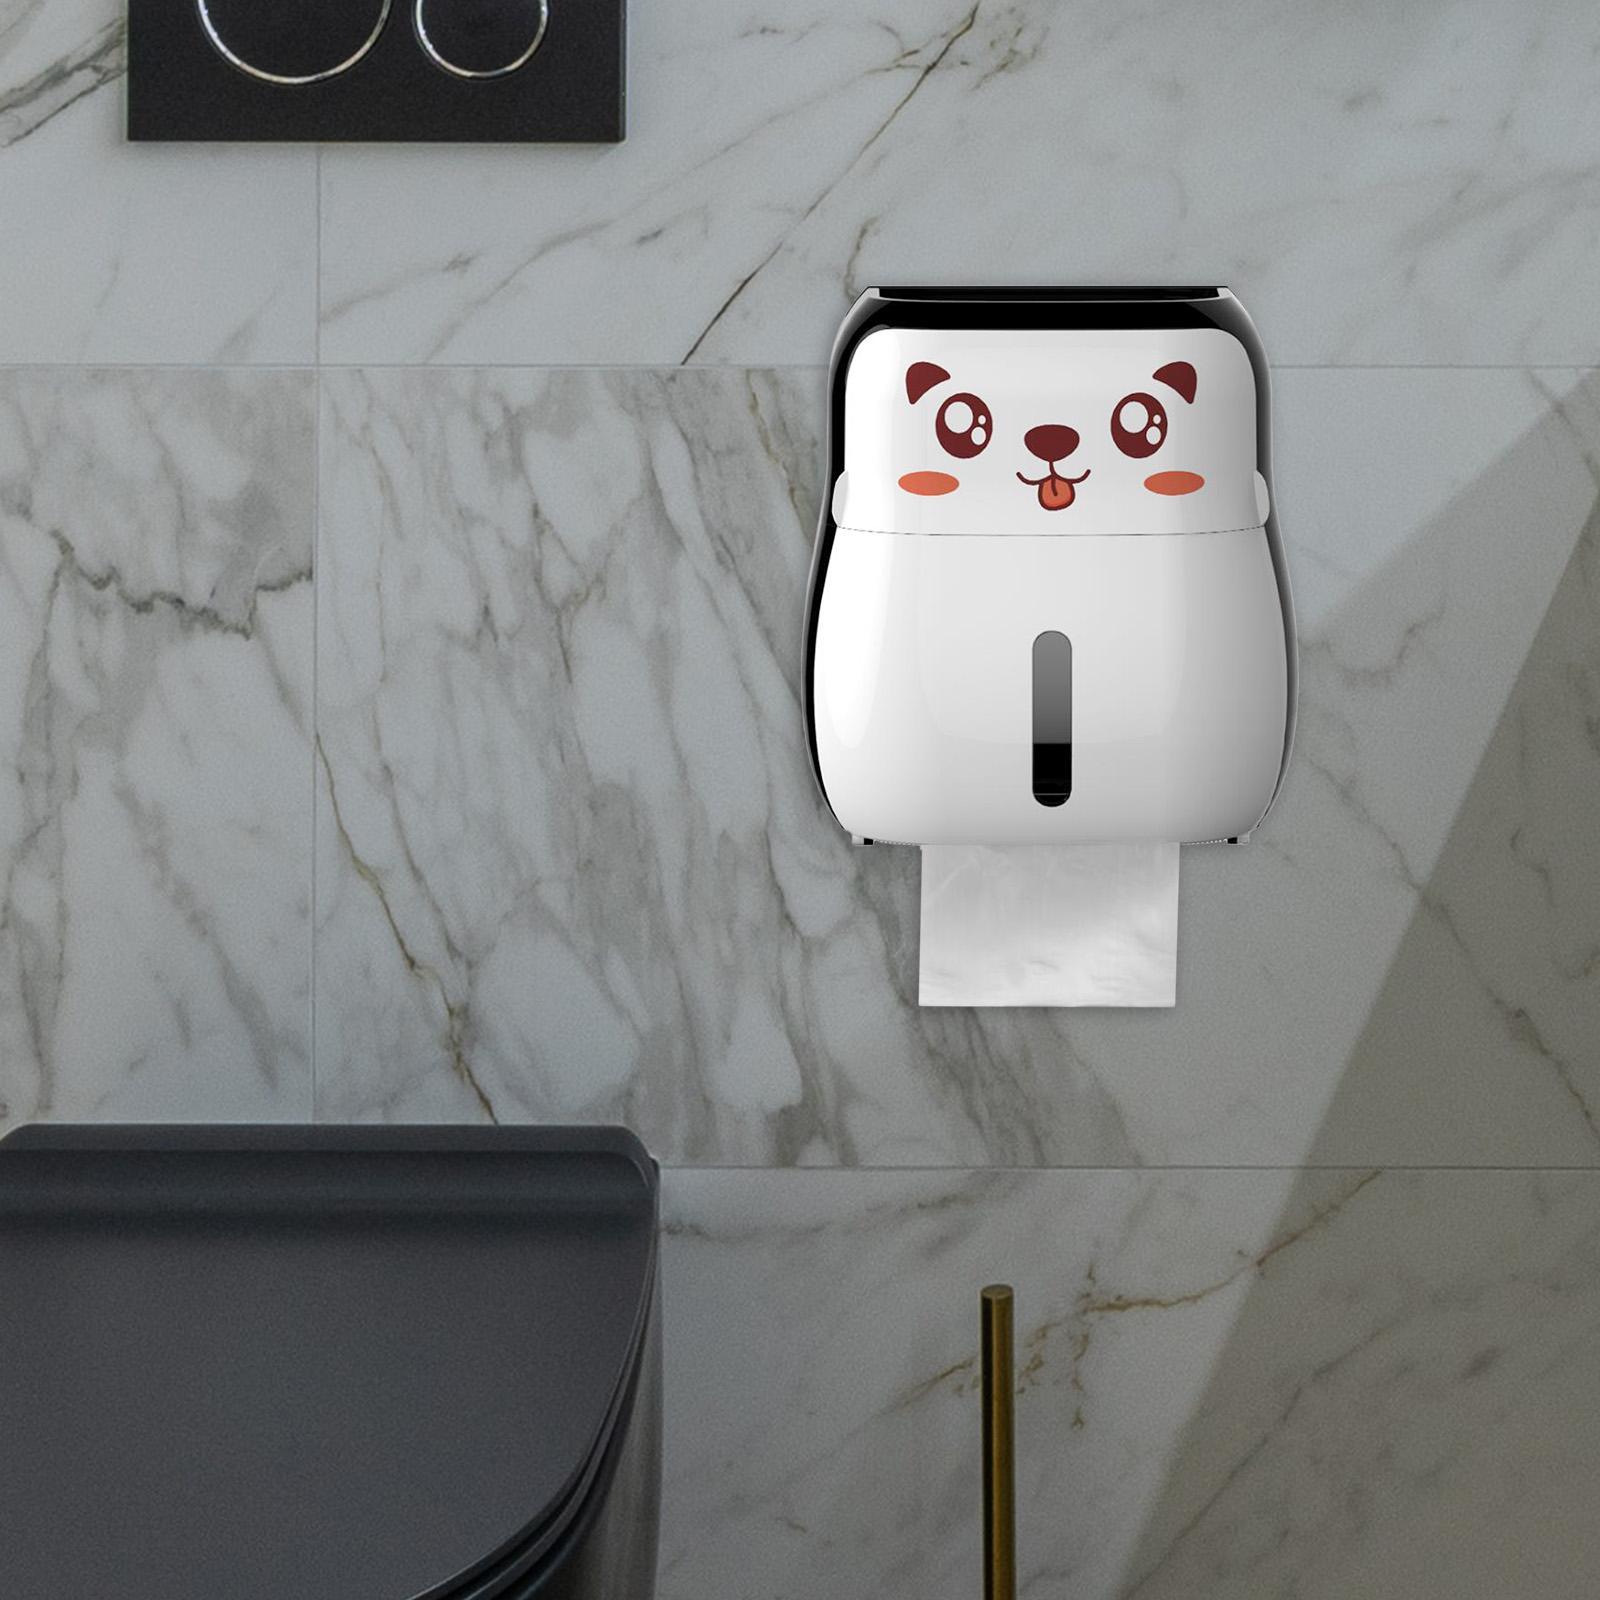 Wall Mounted Tissue Box, Self Adhesives Toilet Roll Holder, Toilet Paper Holder, Waterproof Dustproof Paper Roll Dispenser